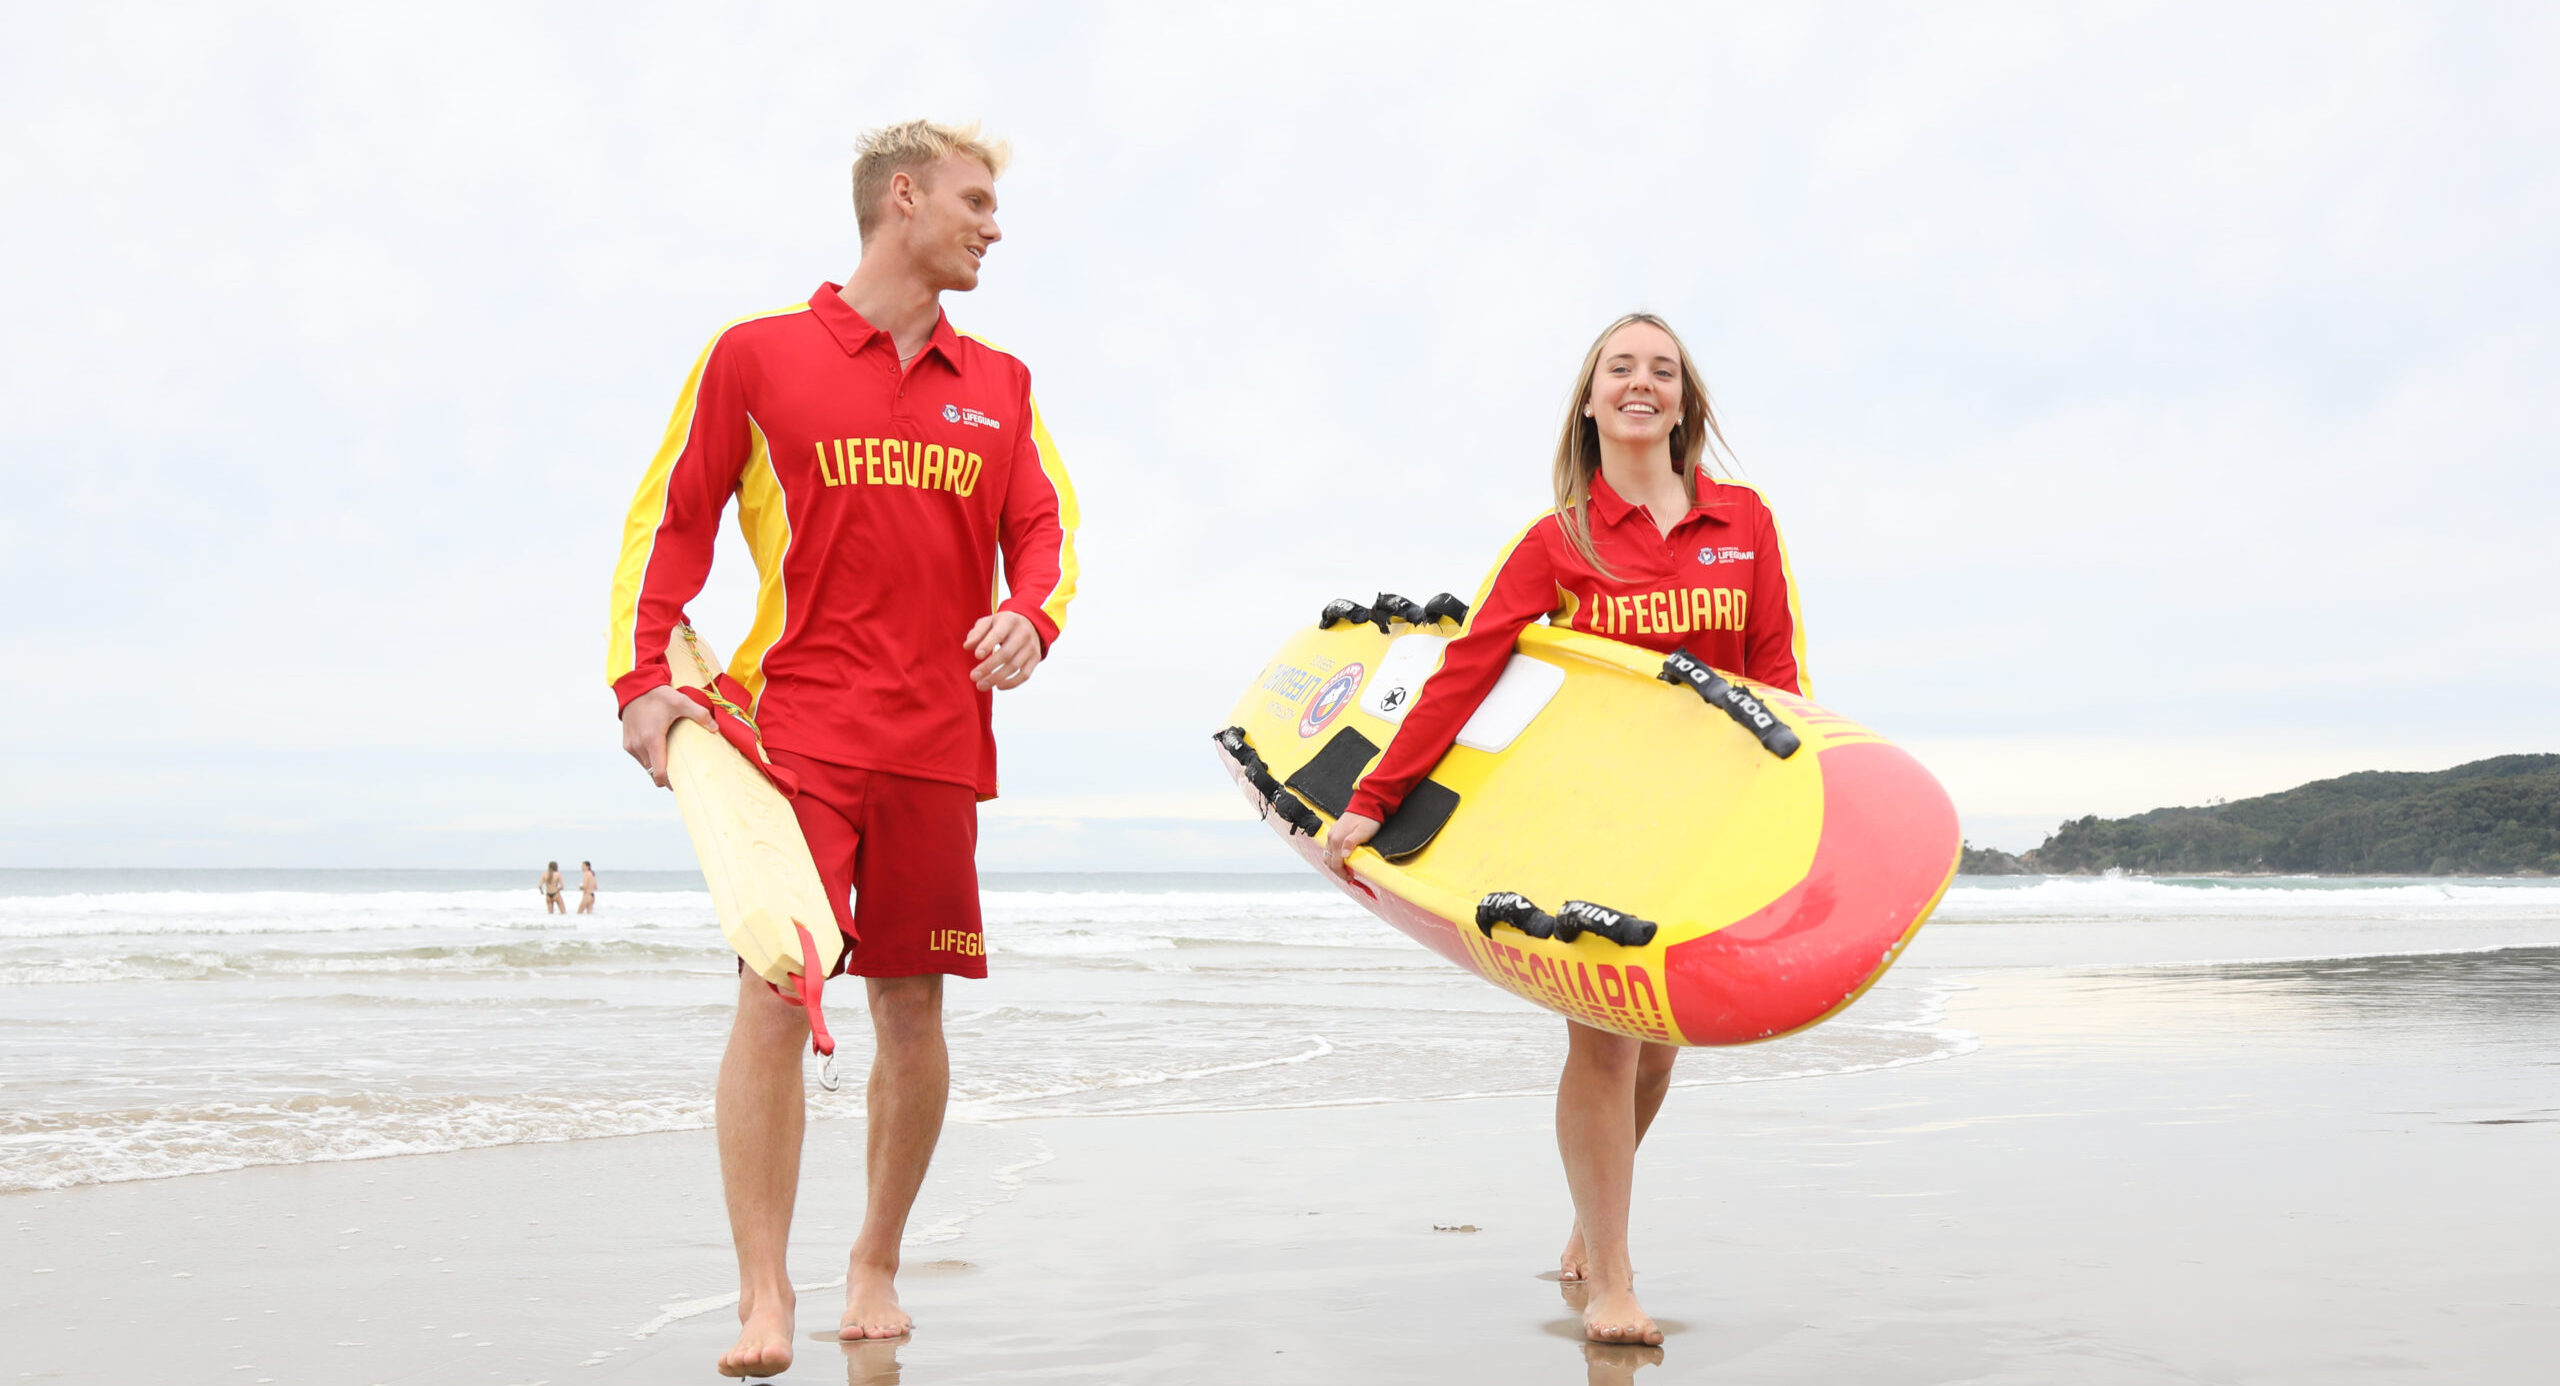 Lifeguards Double Up in State Rescue Award